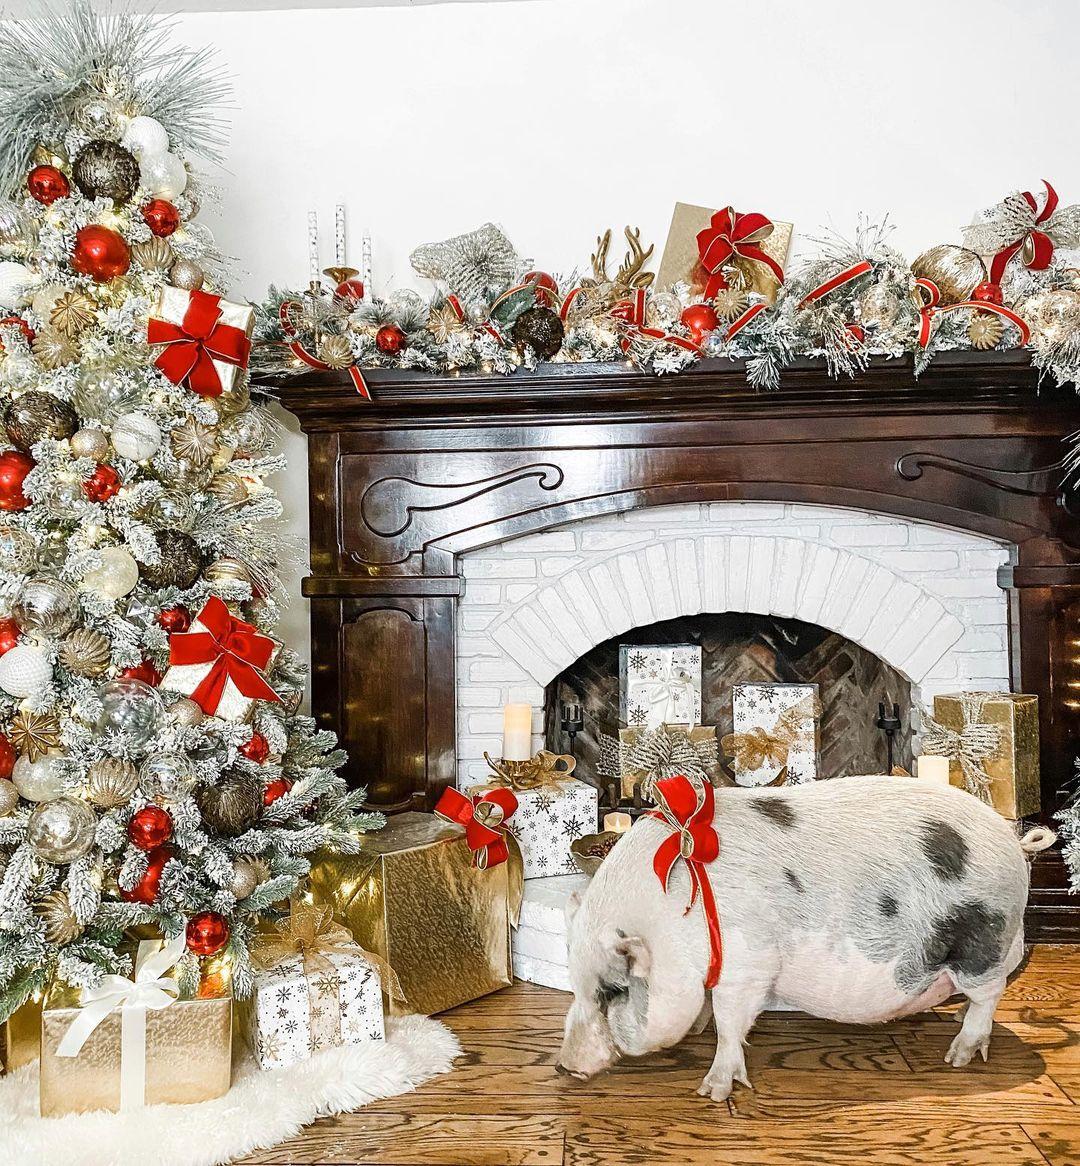 Tori Spelling and pet pig Wilber celebrate Christmas